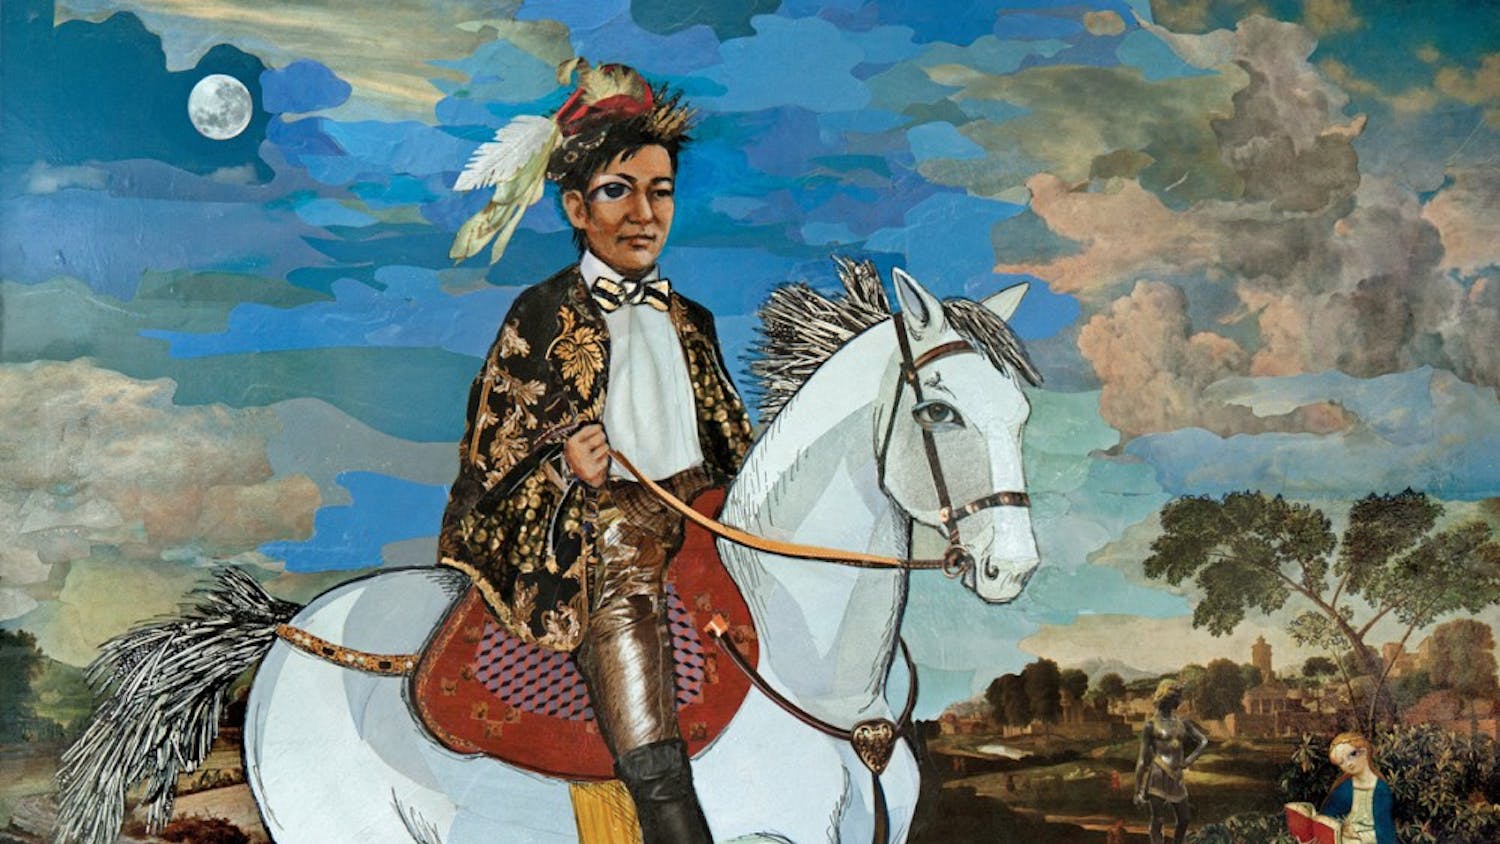 Of Montreal collaborator Kishi Bashi's 2014 release 'Lighght' is a bittersweet album that stays fun throughout.